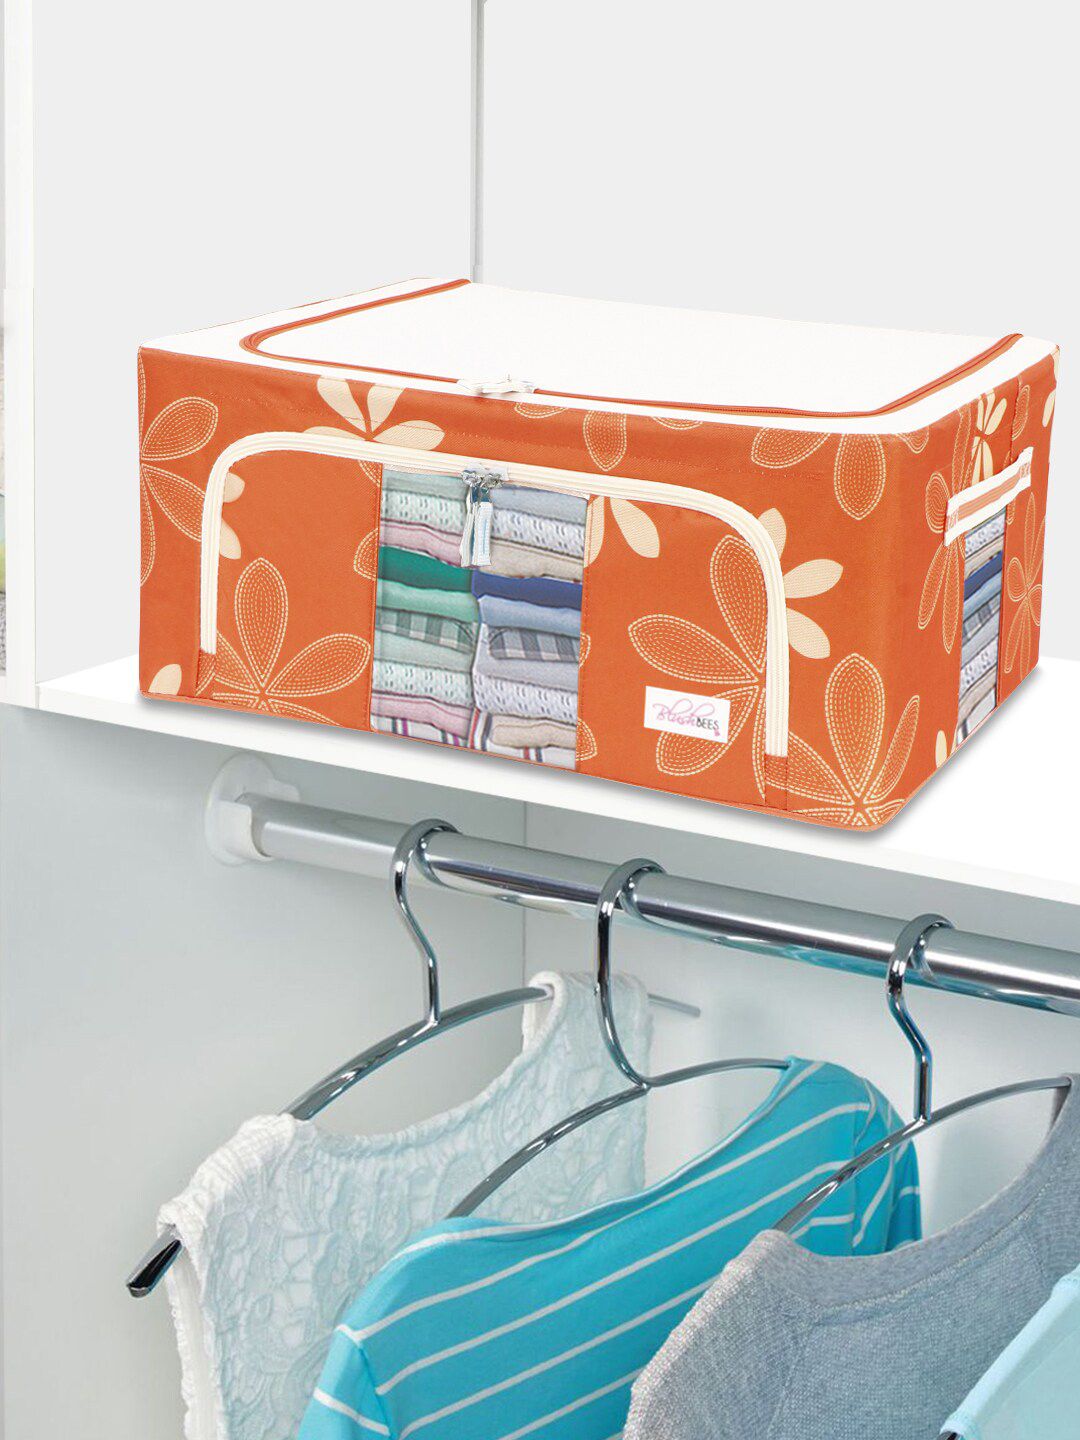 BlushBees Orange Printed Water-Resistant Foldable Storage Box With Transparent Window Price in India